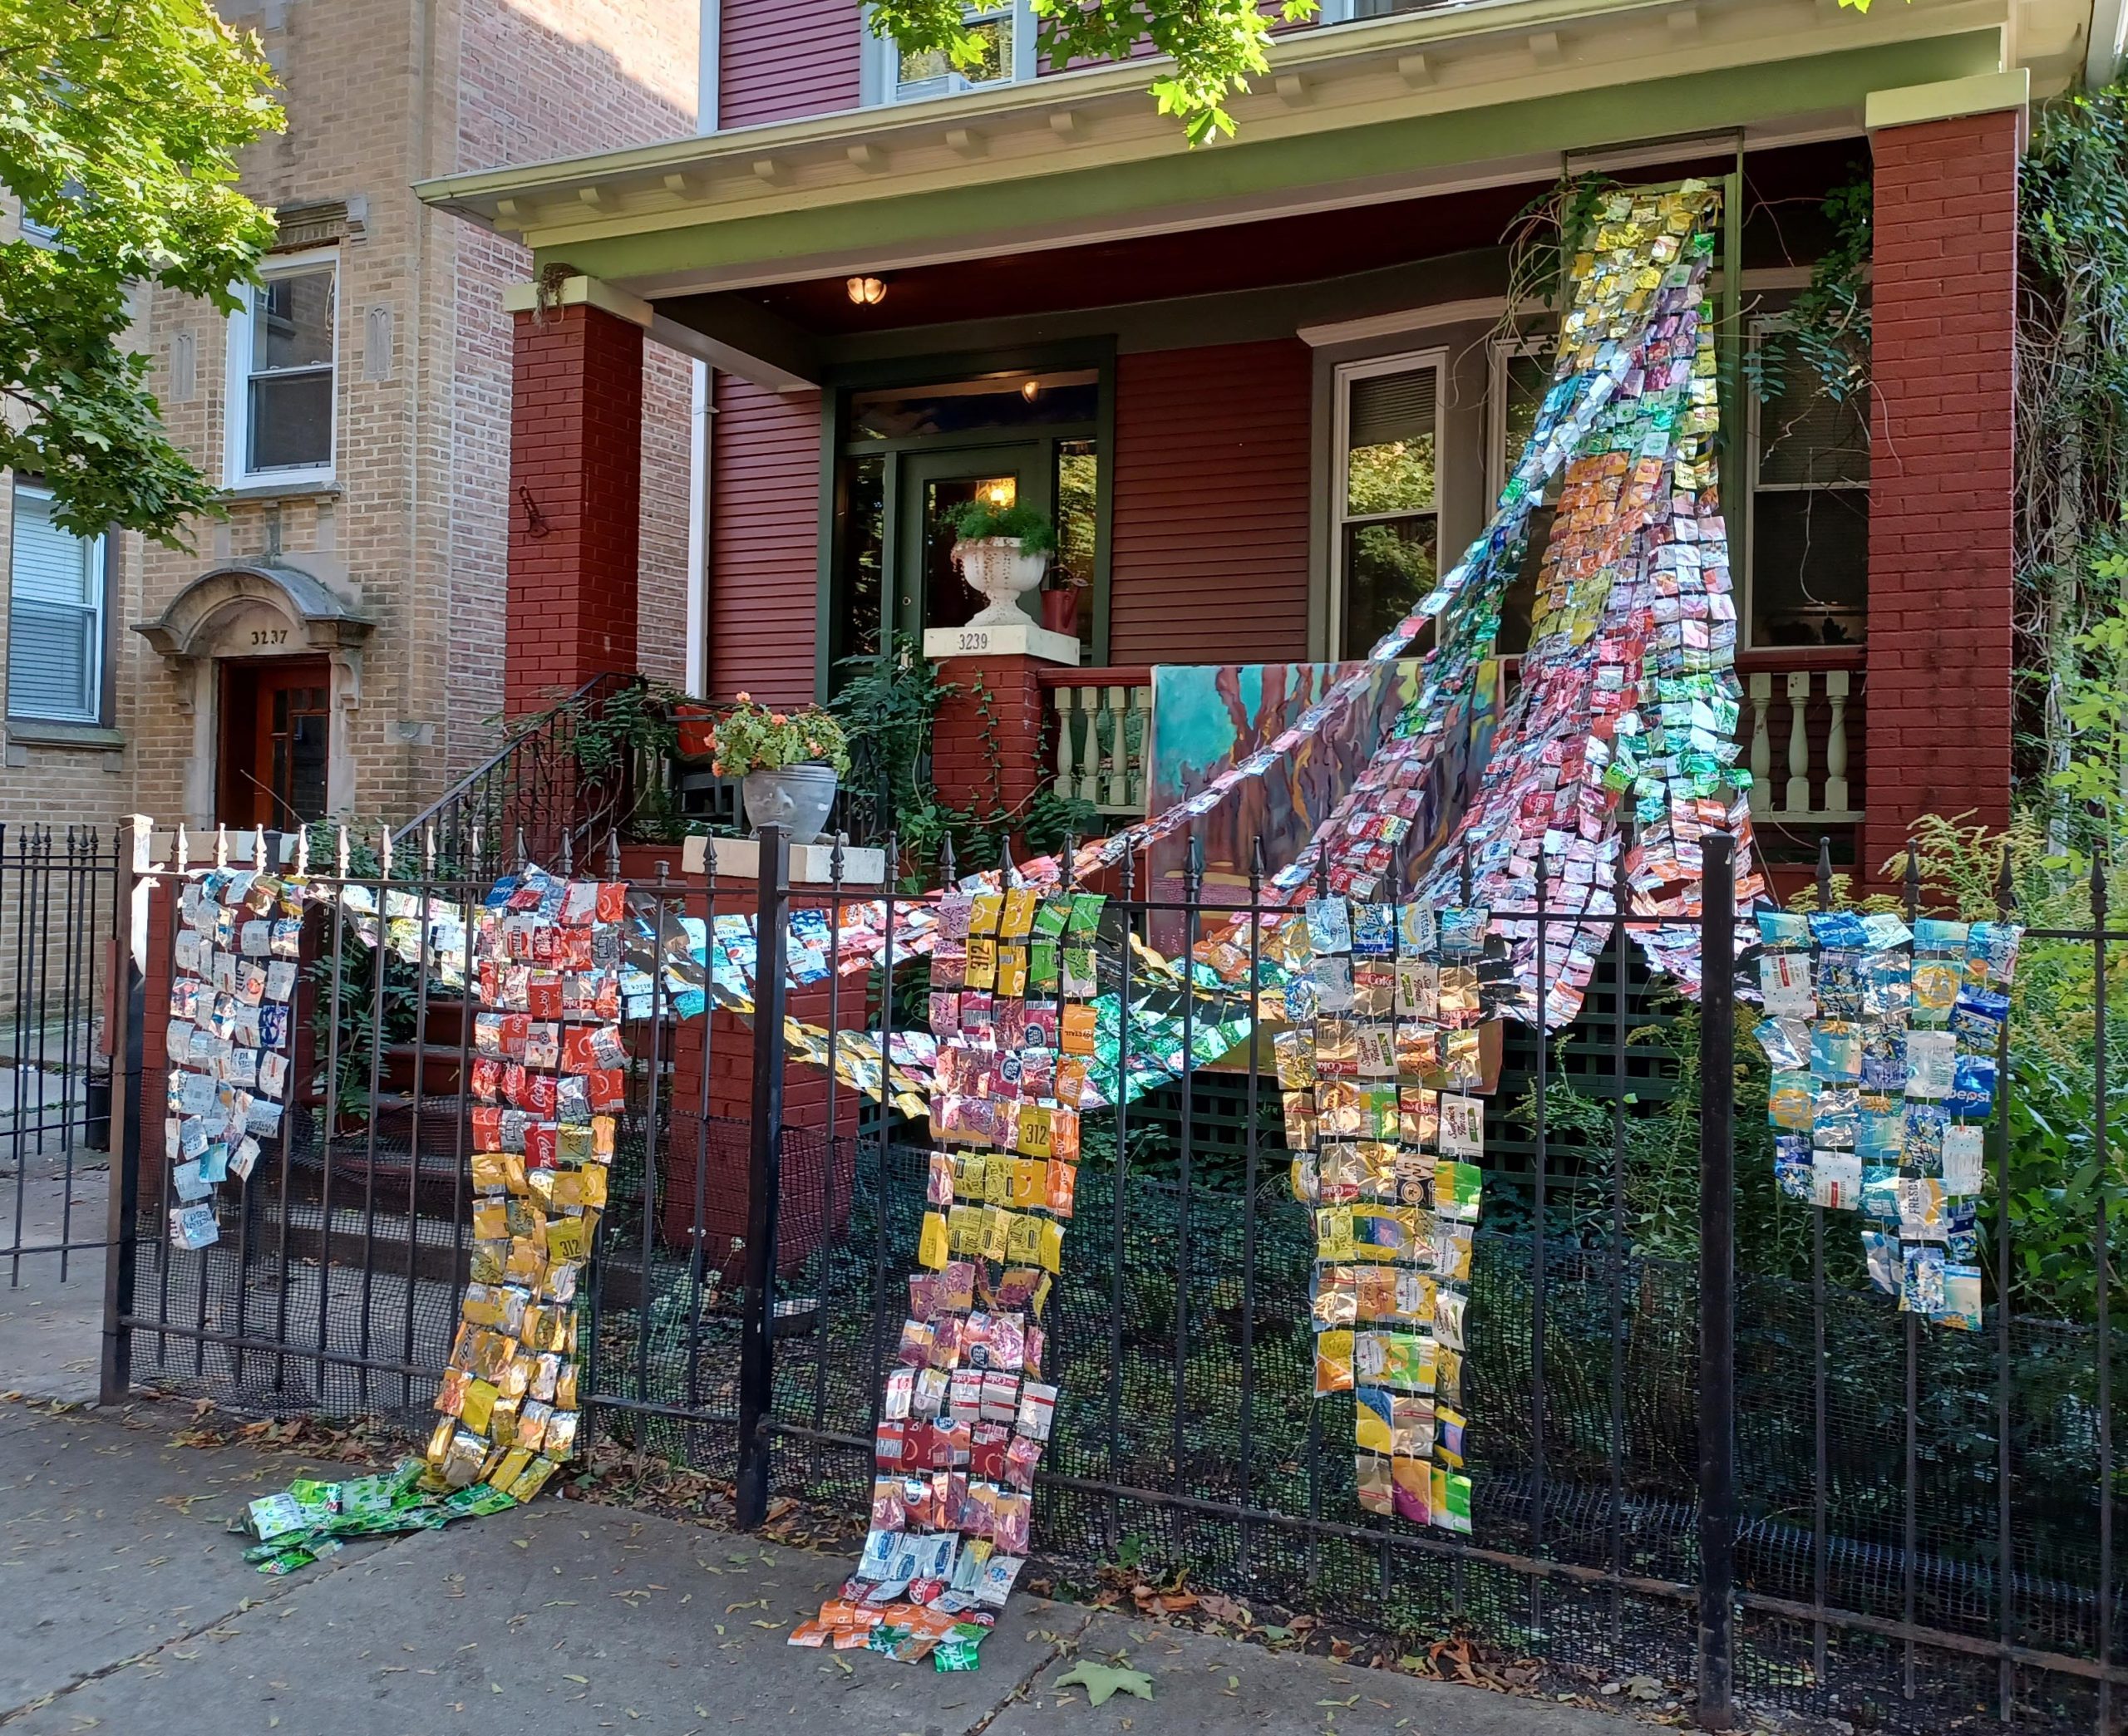 Featured image: Laurie LeBreton, “Collective Effervescence,” 2021. 750 aluminum cans and 350 feet of waxed linen twine. Colorful ribbons patterned from cans are draped from the front porch and over the fence. Courtesy of Kitty Goldbert.